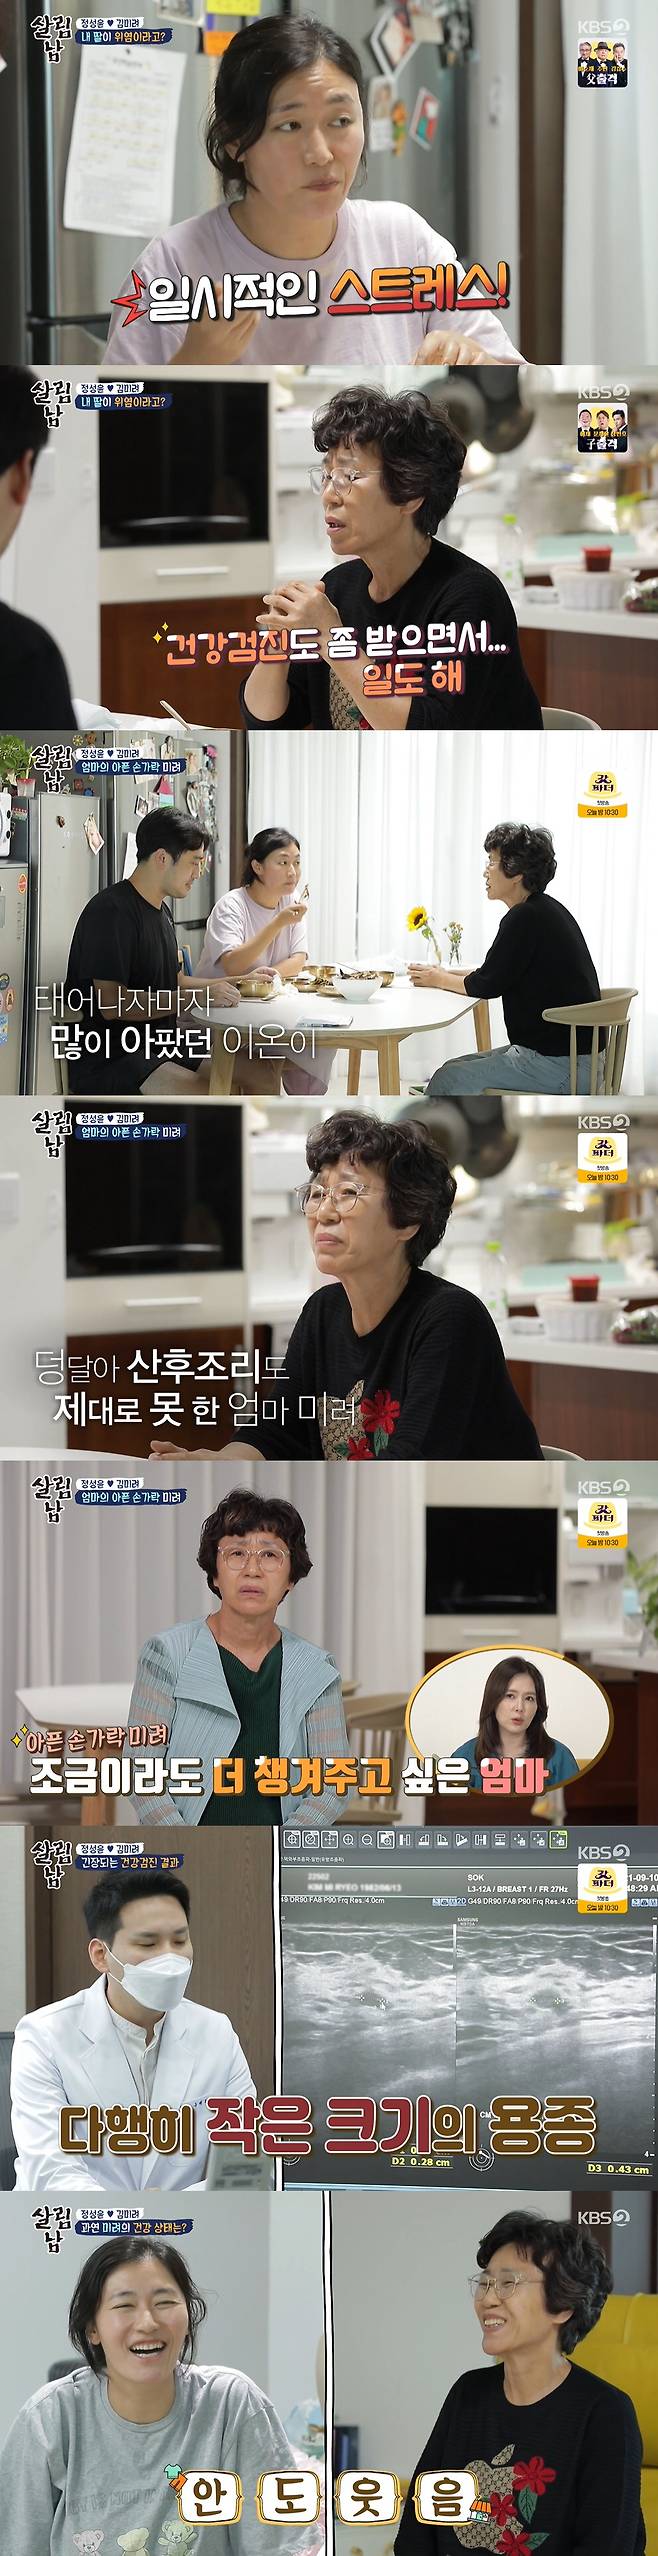 Kim Mi-Ryeo, a Salim Nam broadcaster, gave thank you to Mother who touched her heart.On KBS2s Saving Men Season 2 (hereinafter referred to as Mr. House Husband 2), which aired on the 2nd, the daily lives of Kim Mi-Ryeo and Jung Sung-Yoon were revealed.Kim Mi-Ryeo Mother came to Kim Mi-Ryeos house on the day, saying, My beauty is so busy that I have only contacted her by text.I came home because I was frustrated. Mothers bag was heavy with side dishes, vegetables, kimchi, etc. Kim Mi-Ryeo told Mother, When will I just come?But Mother expressed her heart for her daughter, saying she also squeezed sesame oil.Jung Sung-Yoon surprised Kim Mi-Ryeo, who eats side dishes too well, saying, I think my stomach is all better. Mother then said, I check with my health checkup and work.Im always worried about it. Im sure it hurt because of the ions, he said.I am worried that if my daughter is sick, she can not cook after birth. I had to go to a big hospital as soon as I gave birth to Ion.Kim Mi-Ryeos second son, Ion, was diagnosed with congenital collagen deficiency at the time of childbirth, when a hole was found in his mouth as soon as he was born and was rushed to a large hospital.Fortunately, I am growing well now.Meanwhile, Kim Mi-Ryeo, who visited the hospital, told the doctor, There is a small polyp in the gallbladder.If you are 1cm or more, you will have to do surgery because it is small and it is not bad shape, so you will see it again in a year.There are a lot of people. The doctor also said, Tumour is visible on the thyroid, but not a malicious tumour.The size is 1.25cm, so I think I should do a follow-up test after six months. He said, The stomach is clean and there is no fatty liver. At that time Kim Mi-Ryeo Mother started cleaning at Kim Mi-Ryeos house without a break.Mother said to herself, Its disgusting Kim Mi-Ryeo Jung Sung-Yoon! But said, What should I do? Its my mother. Its my mother.Kim Mi-Ryeo, who returned home, admired, saying, The house has become a Model house.Mother was delighted to hear Kim Mi-Ryeos health checkup results and said, Ill do something delicious.While Kim Mi-Ryeo was on schedule, Mother and Jung Sung-Yoon bought dinner ingredients for the market.Kim Mi-Ryeo, who returned home, expressed his gratitude to Mother for saying, Lets deliver it, I knew it would be like this.Kim Mi-Ryeo dined and said: My mom would wake up from 5 to 6am and pack lunch boxes; there was a machine that could go for a mackerel.Mom thought it was really great. Mother said, My brother and sister did not say that. Even though Im not going to talk about it, Ionie grows up lovingly and tells me, and the West has been suffering a lot.I would have been willing if I had come together soon. He again apologized to the two people who took care of the ion without confidence.Kim Mi-Ryeo then broke down tears after confiding, I think of my mother when Im having a hard time looking at the children, and Mother also stole tears and said,  (when) I think of my mother.In the meantime, Jung Sung-Yoon laughed when he noticed that he did not stop eating.Mum is like a great man - raising children, starting a family and feeling more, Kim Mi-Ryeo said in an interview.Mother said, I thought my daughter was getting older, but I did not express it on the outside, but I have a child and I express it like that.